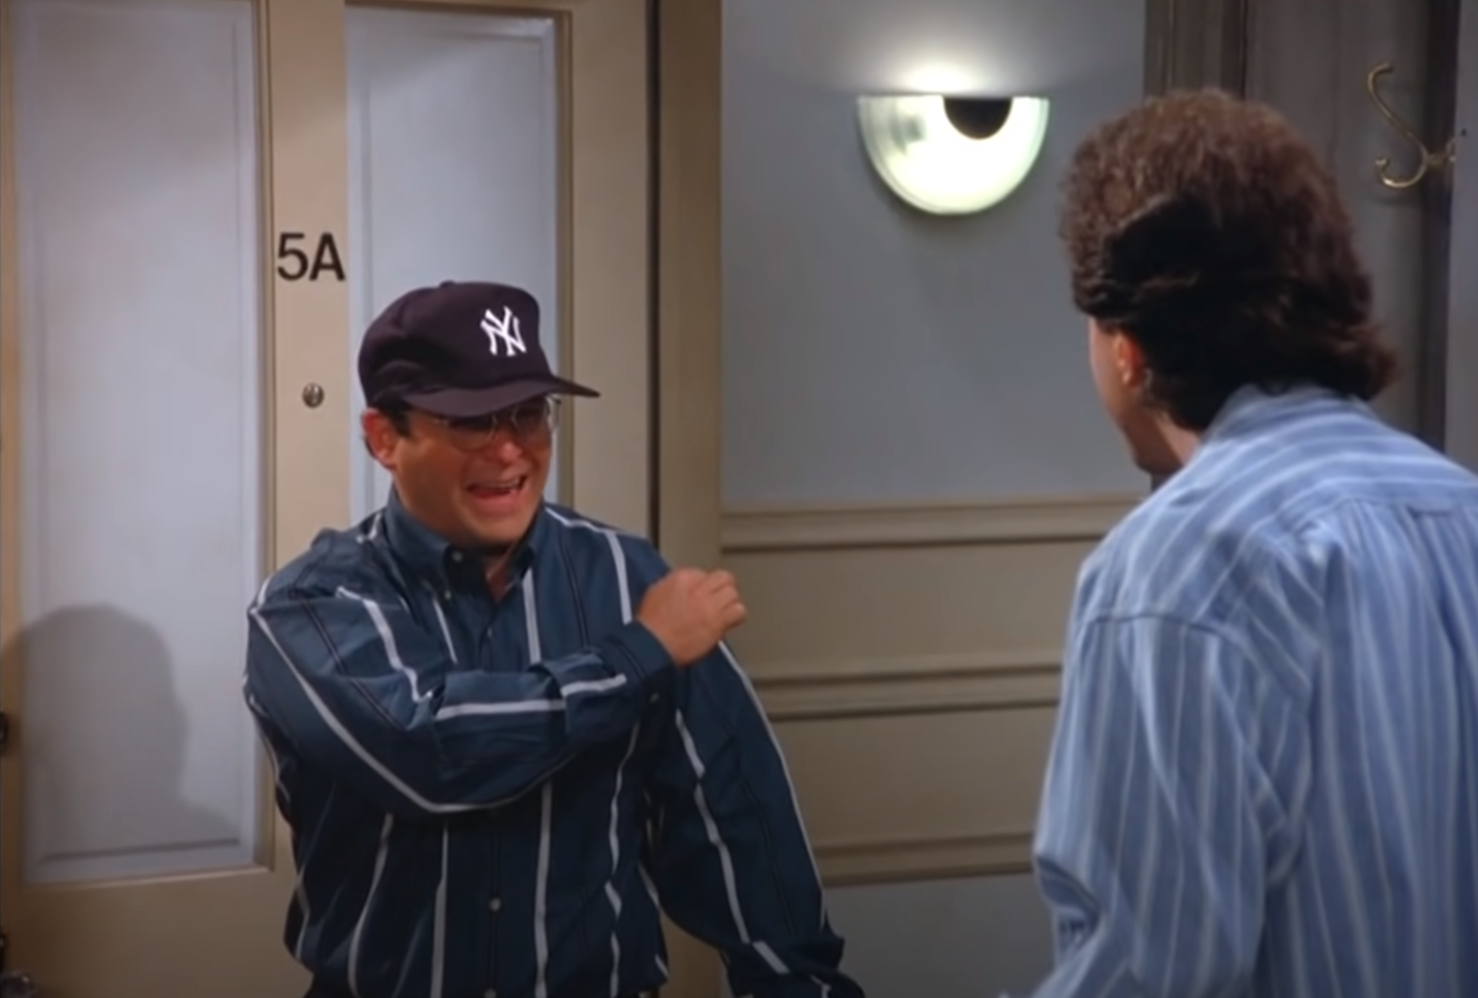 George exults while wearing a Yankees cap after being hired as the assistant to the traveling secretary for the New York Yankees in an episode of "Seinfeld."